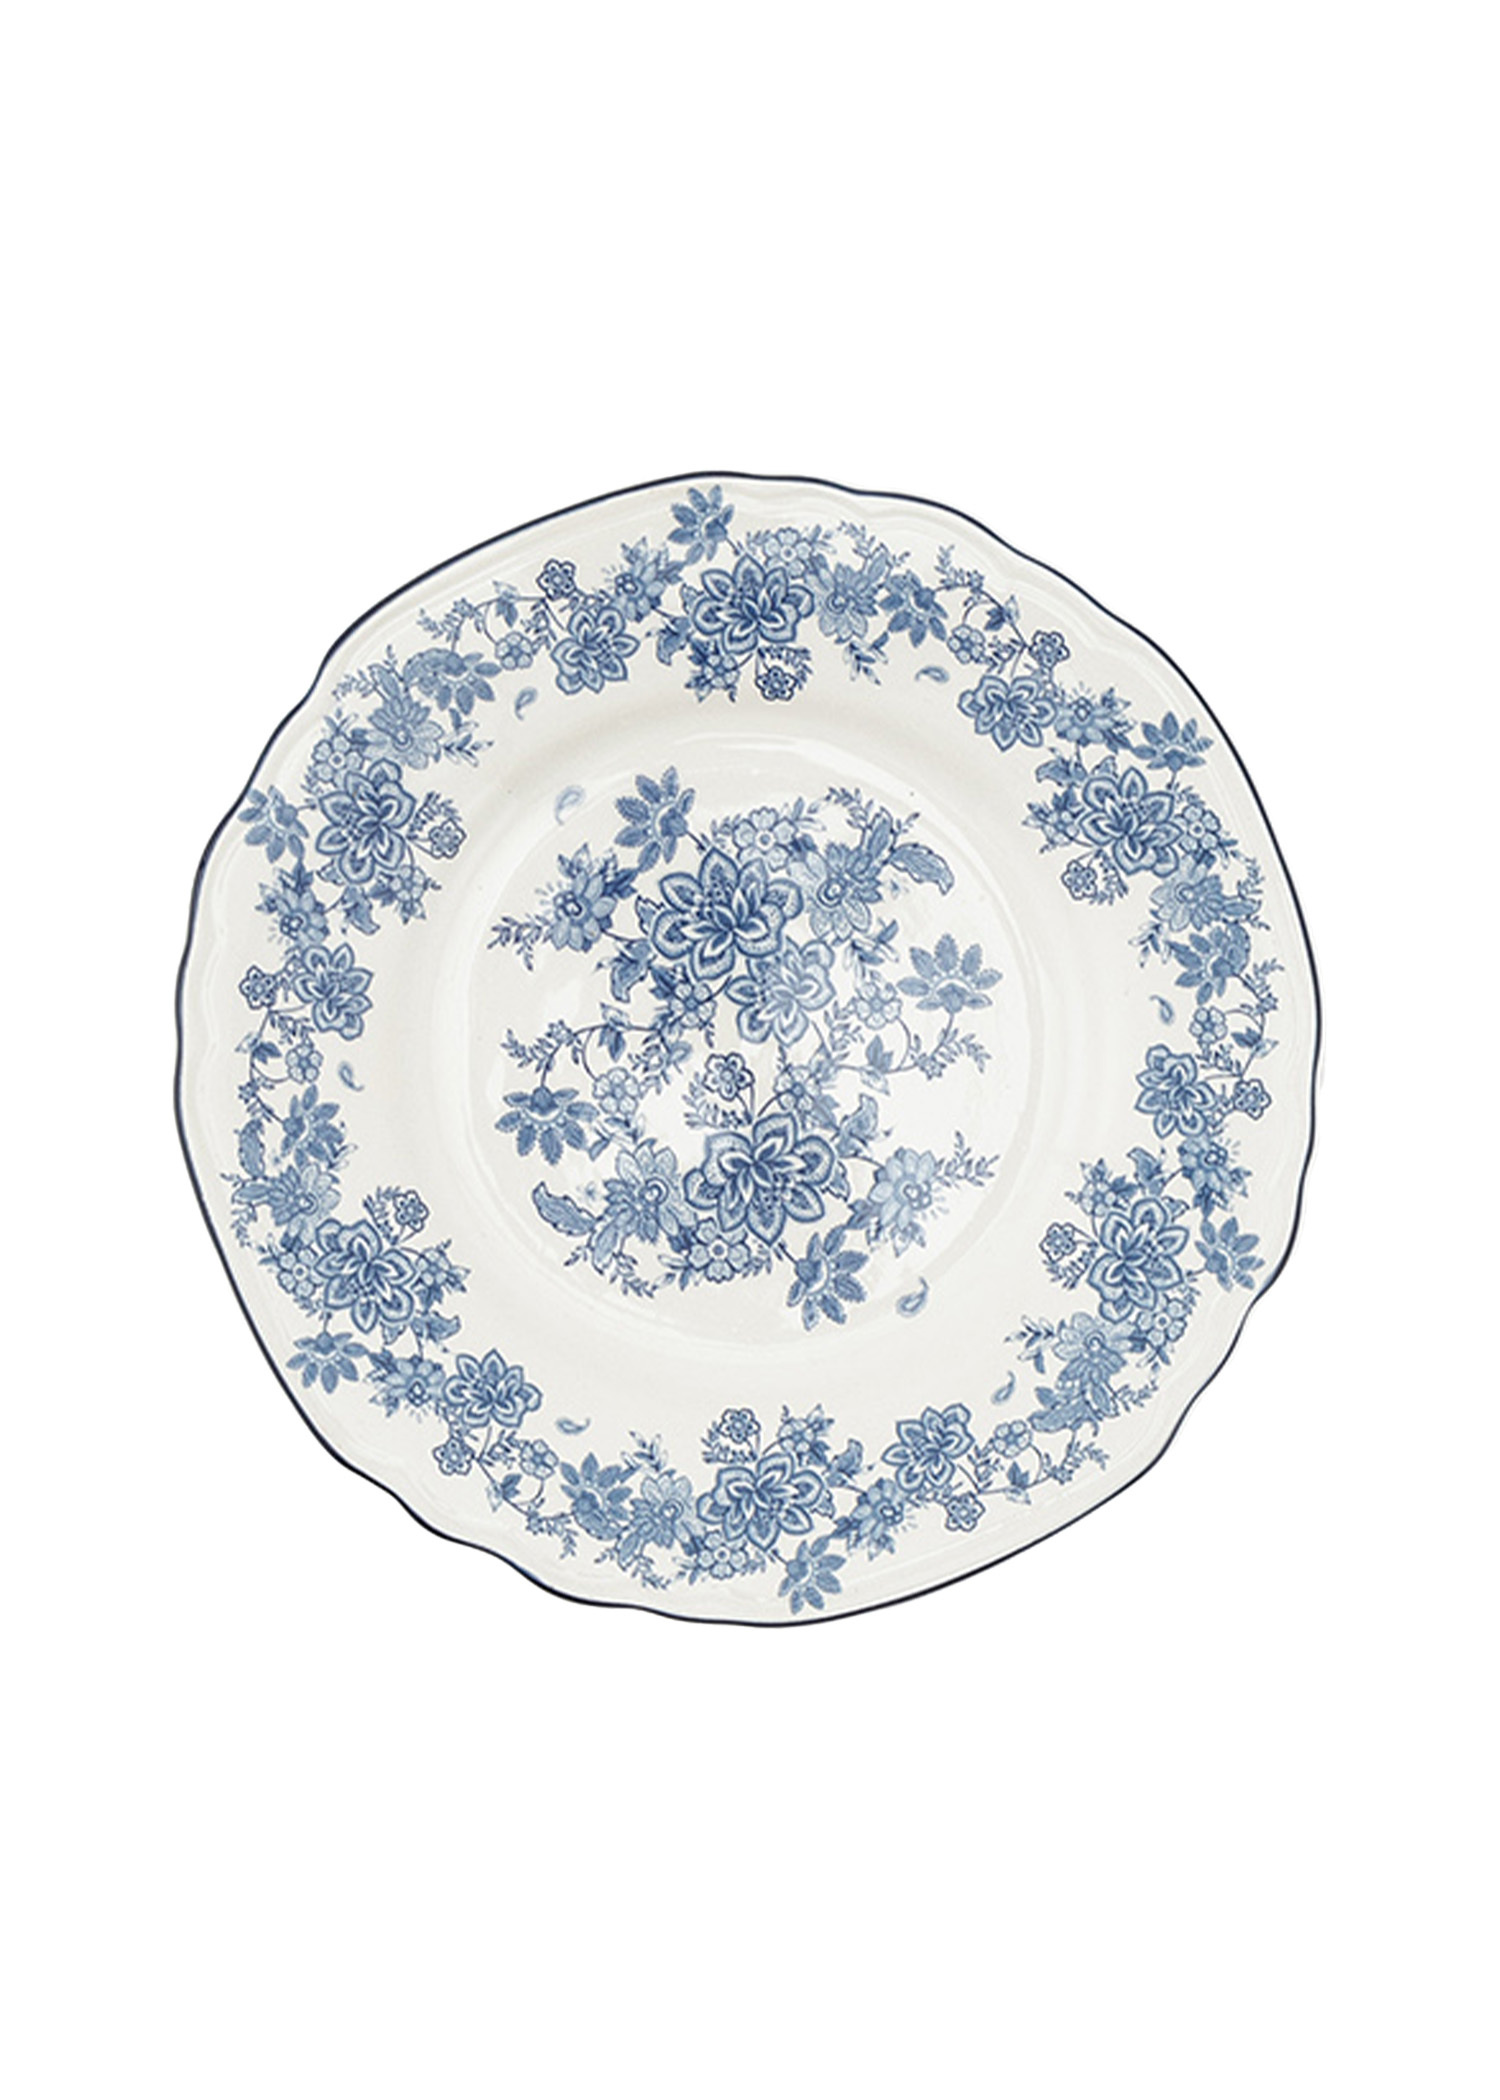 Floral stoneware side plate Image 0